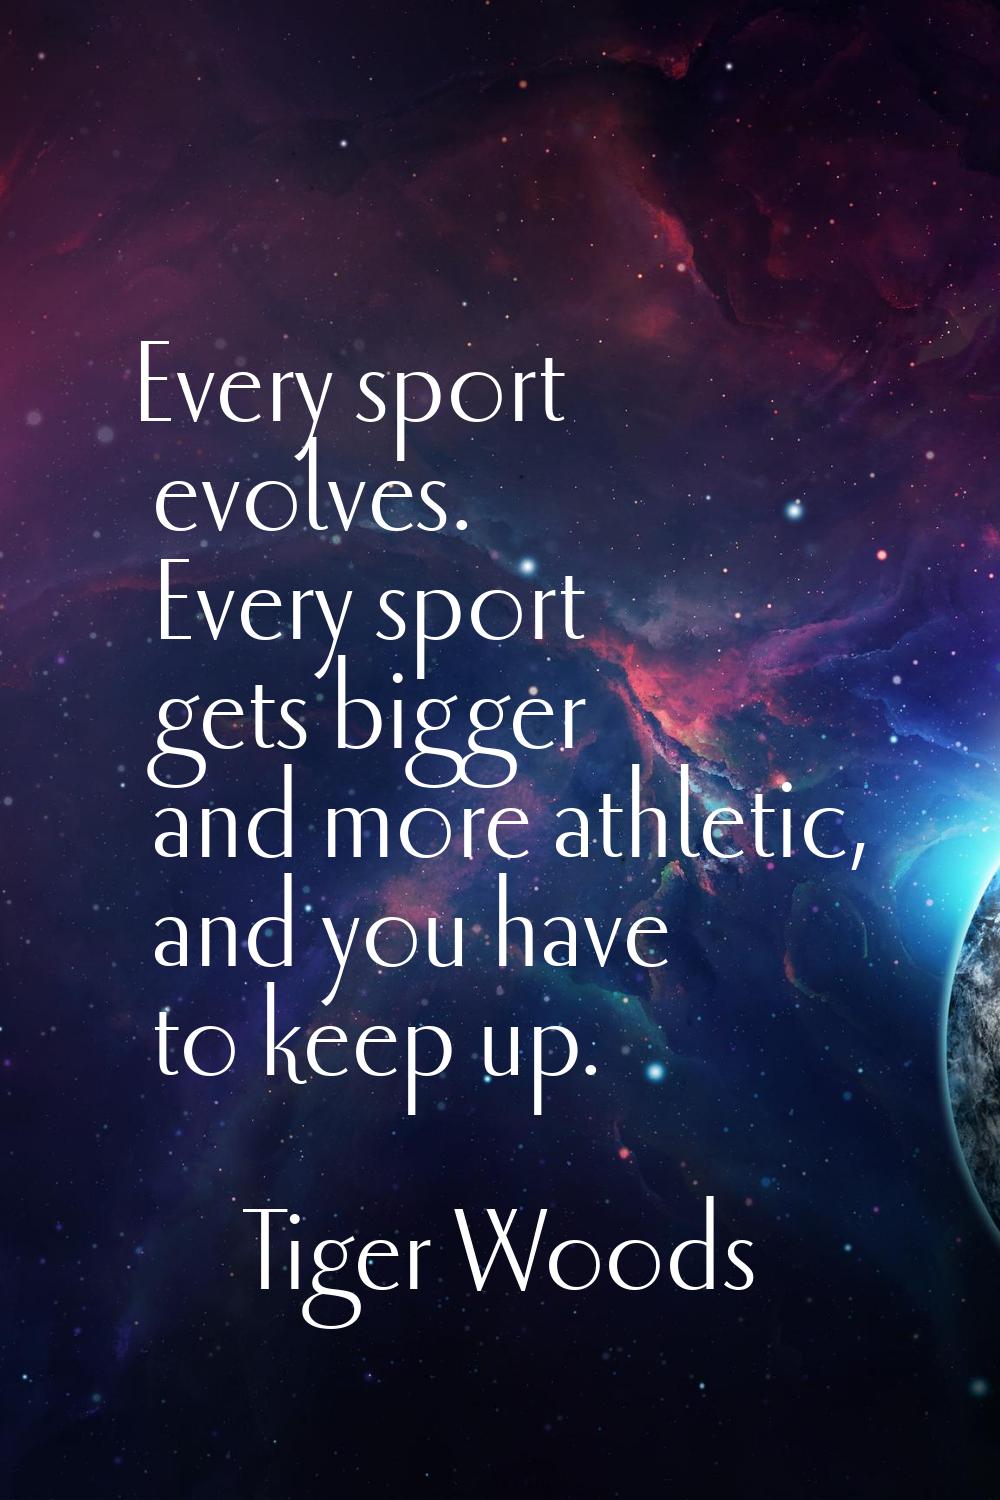 Every sport evolves. Every sport gets bigger and more athletic, and you have to keep up.